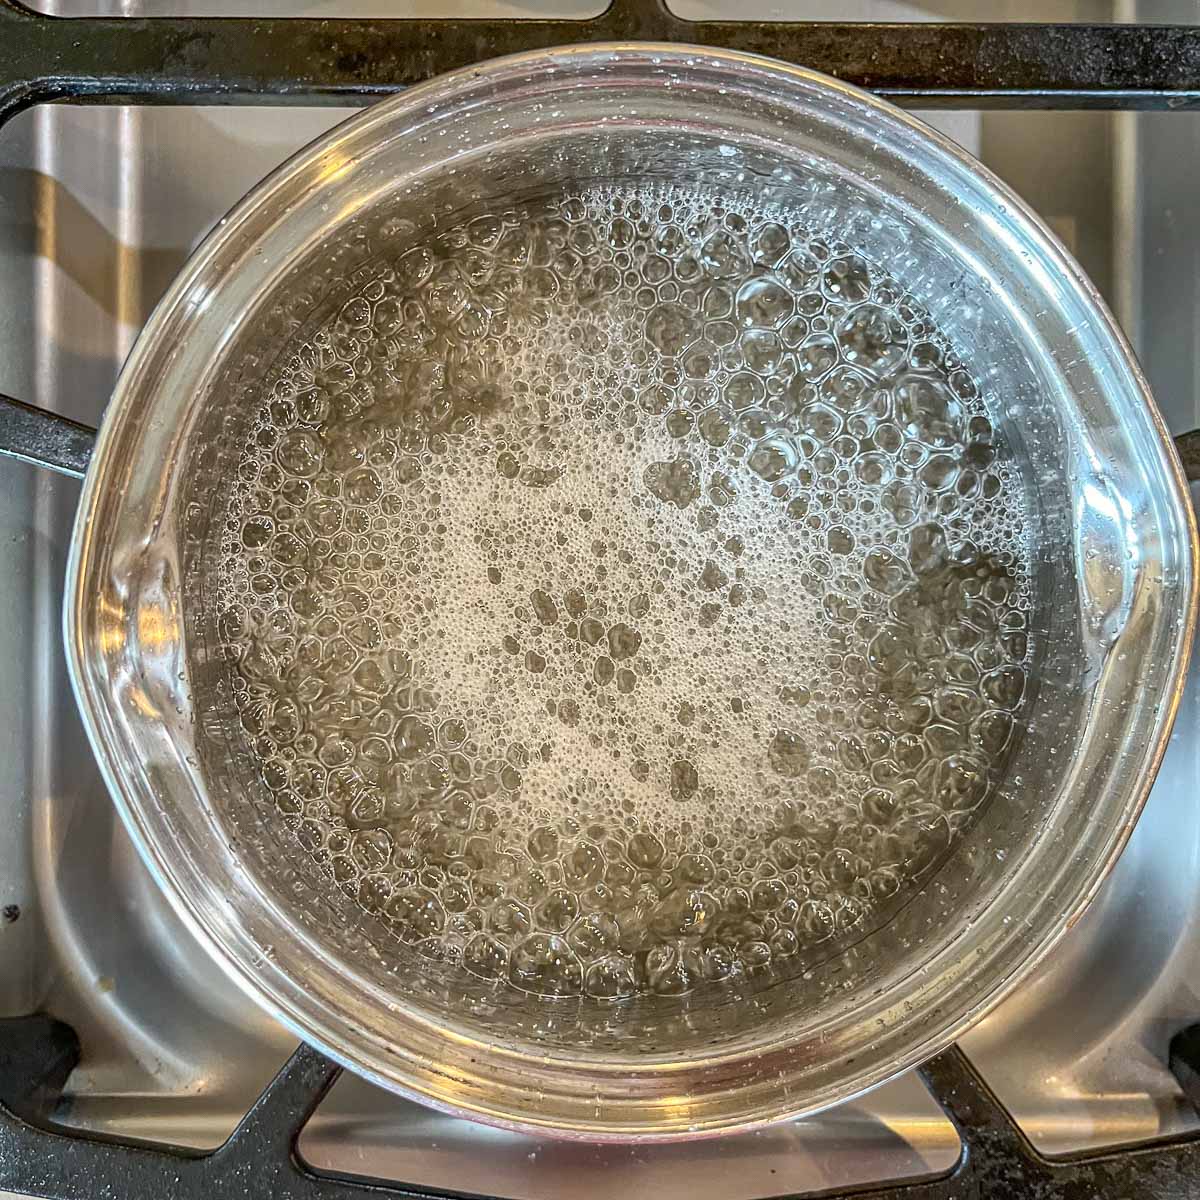 syrup boiling in a pan